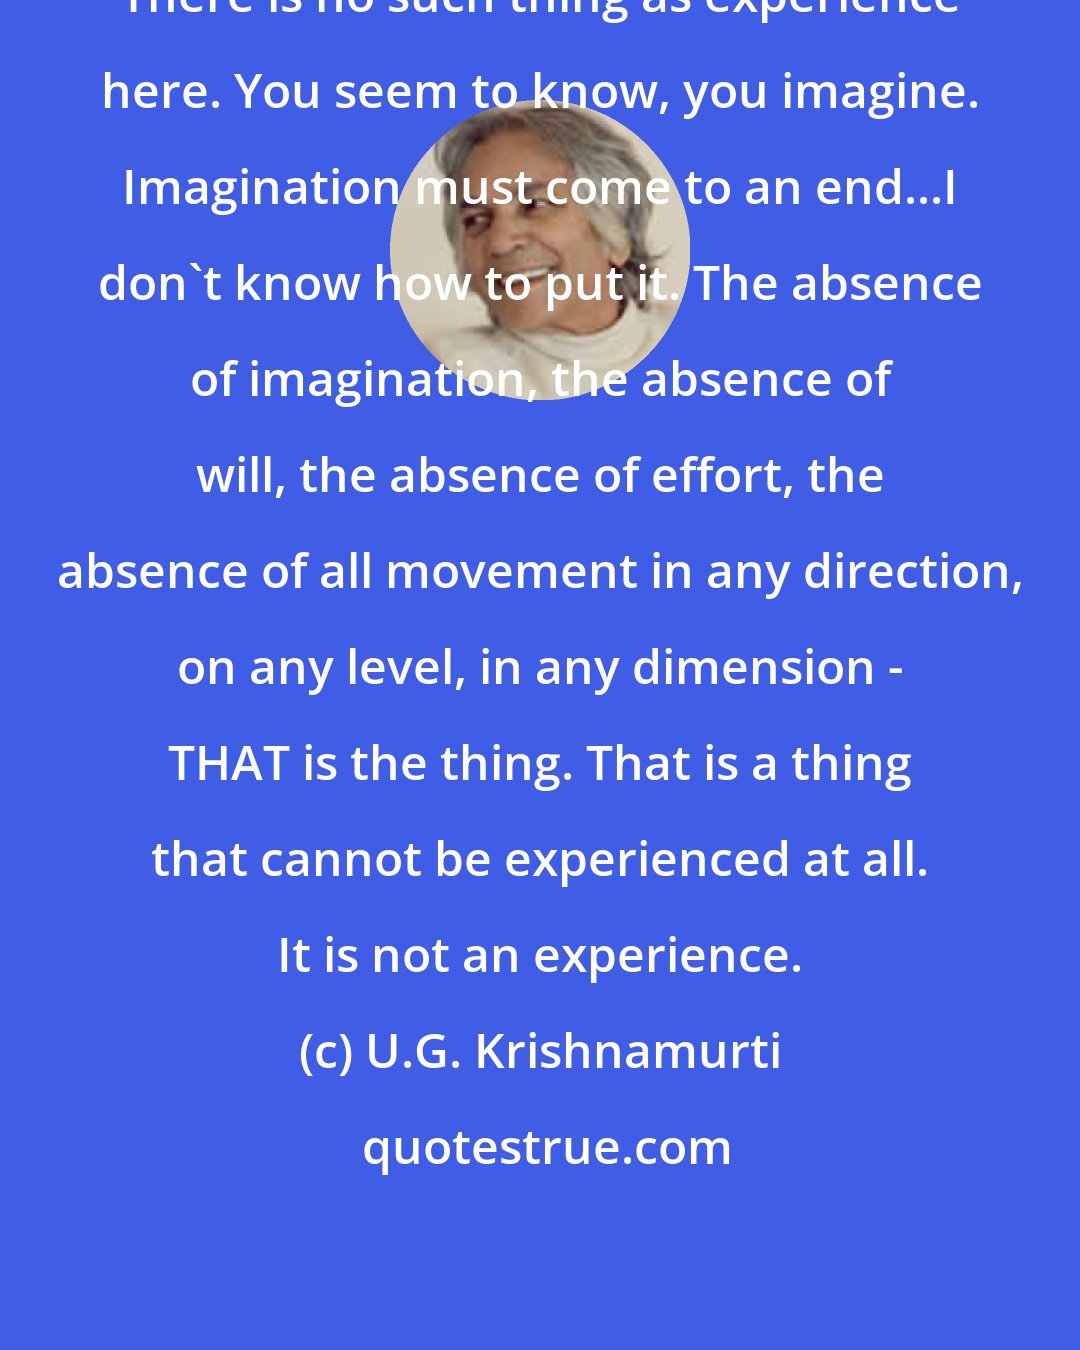 U.G. Krishnamurti: There is no such thing as experience here. You seem to know, you imagine. Imagination must come to an end...I don't know how to put it. The absence of imagination, the absence of will, the absence of effort, the absence of all movement in any direction, on any level, in any dimension - THAT is the thing. That is a thing that cannot be experienced at all. It is not an experience.